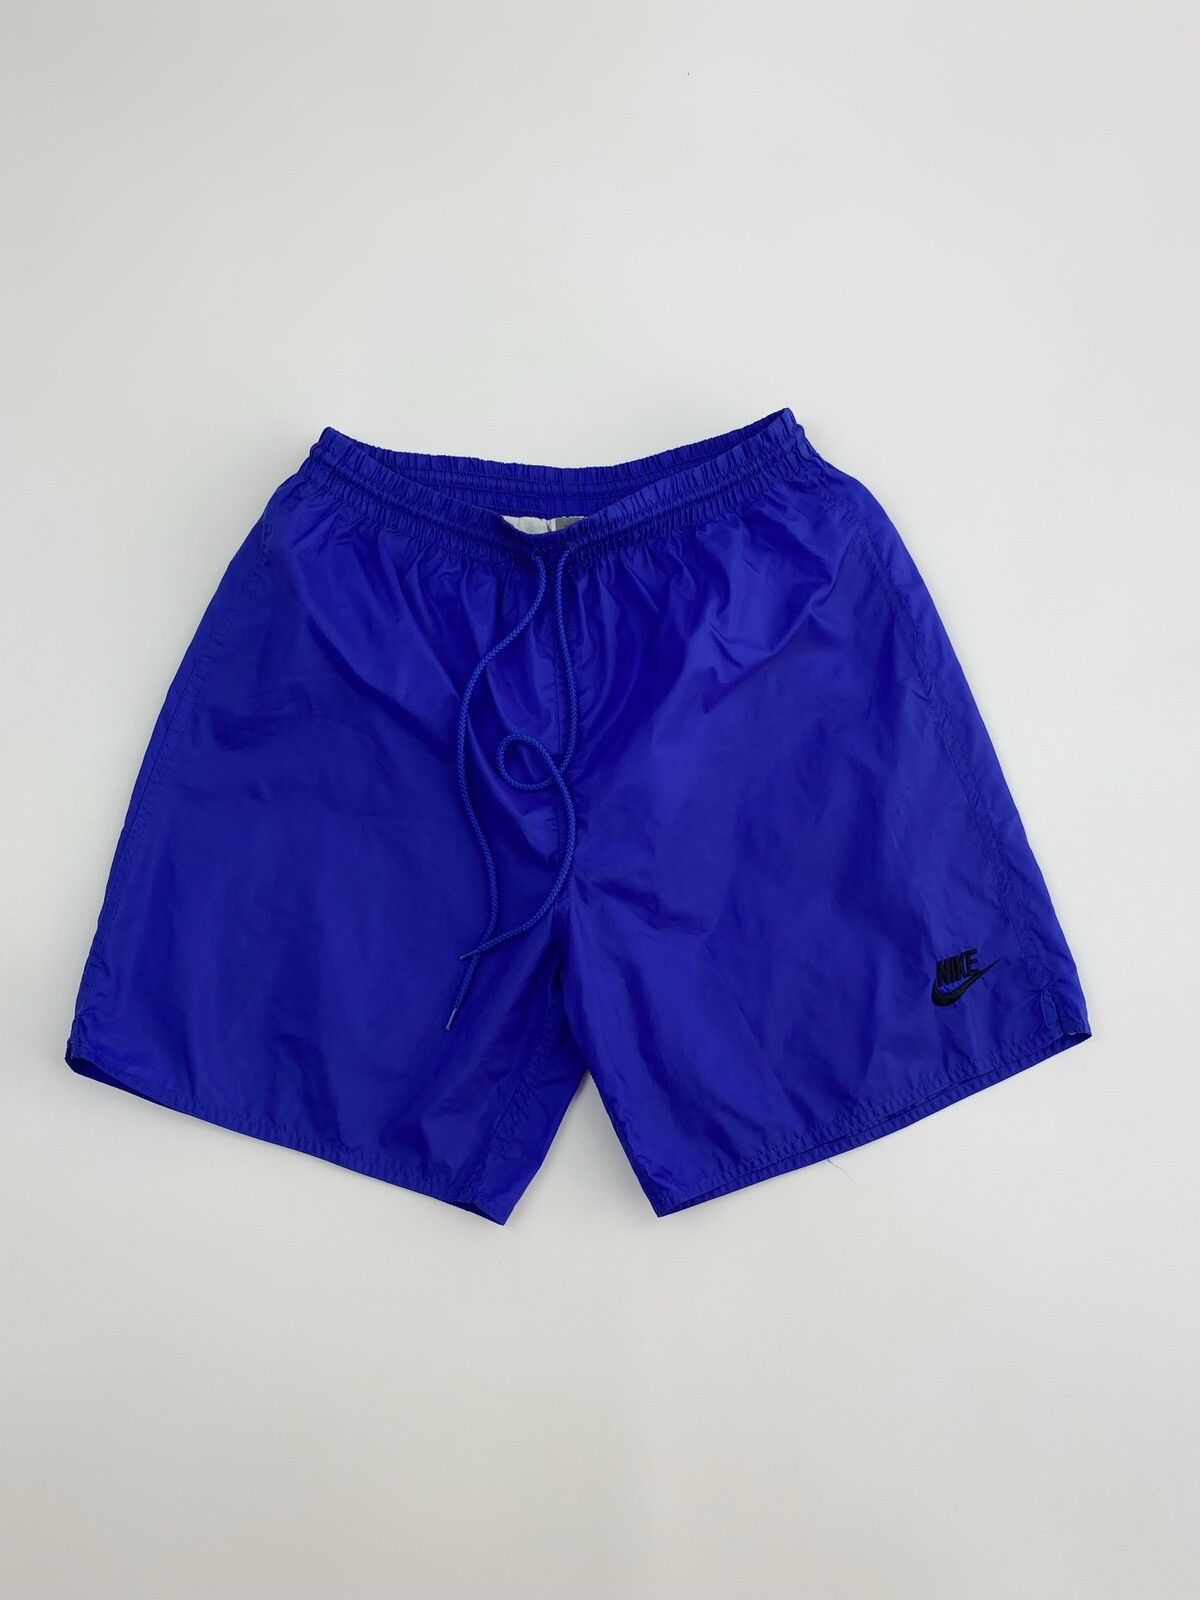 Pre-owned Nike X Vintage 1990's Vintage Nike Nylon Shorts In Blue